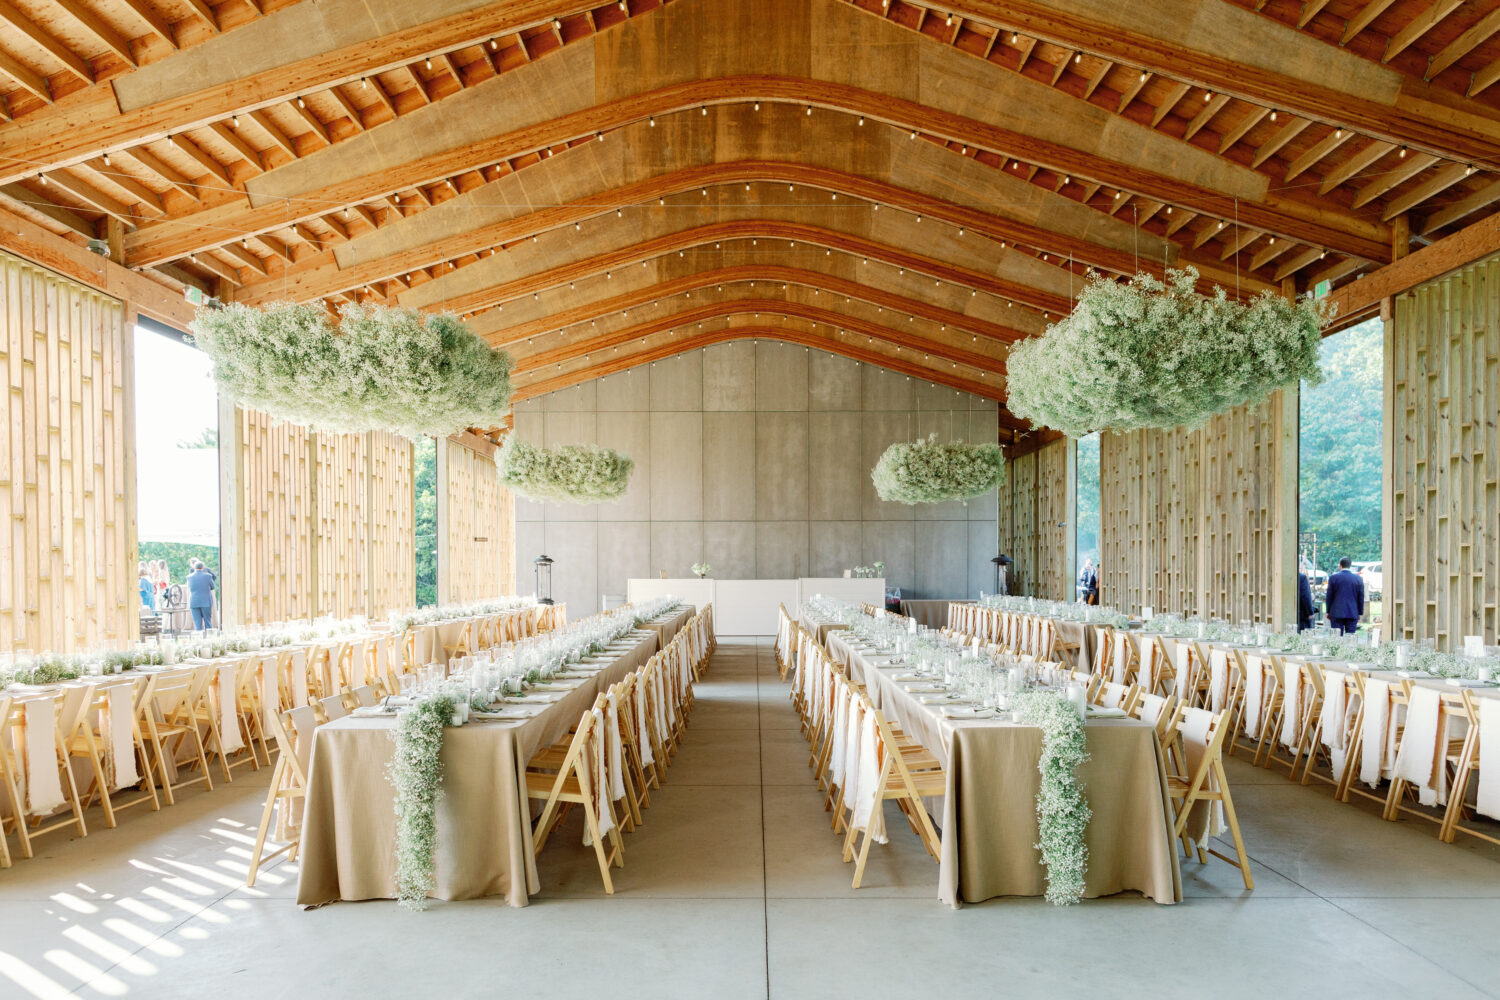 Gather Greene Wedding Pavilion reception design with long tables and floral clouds